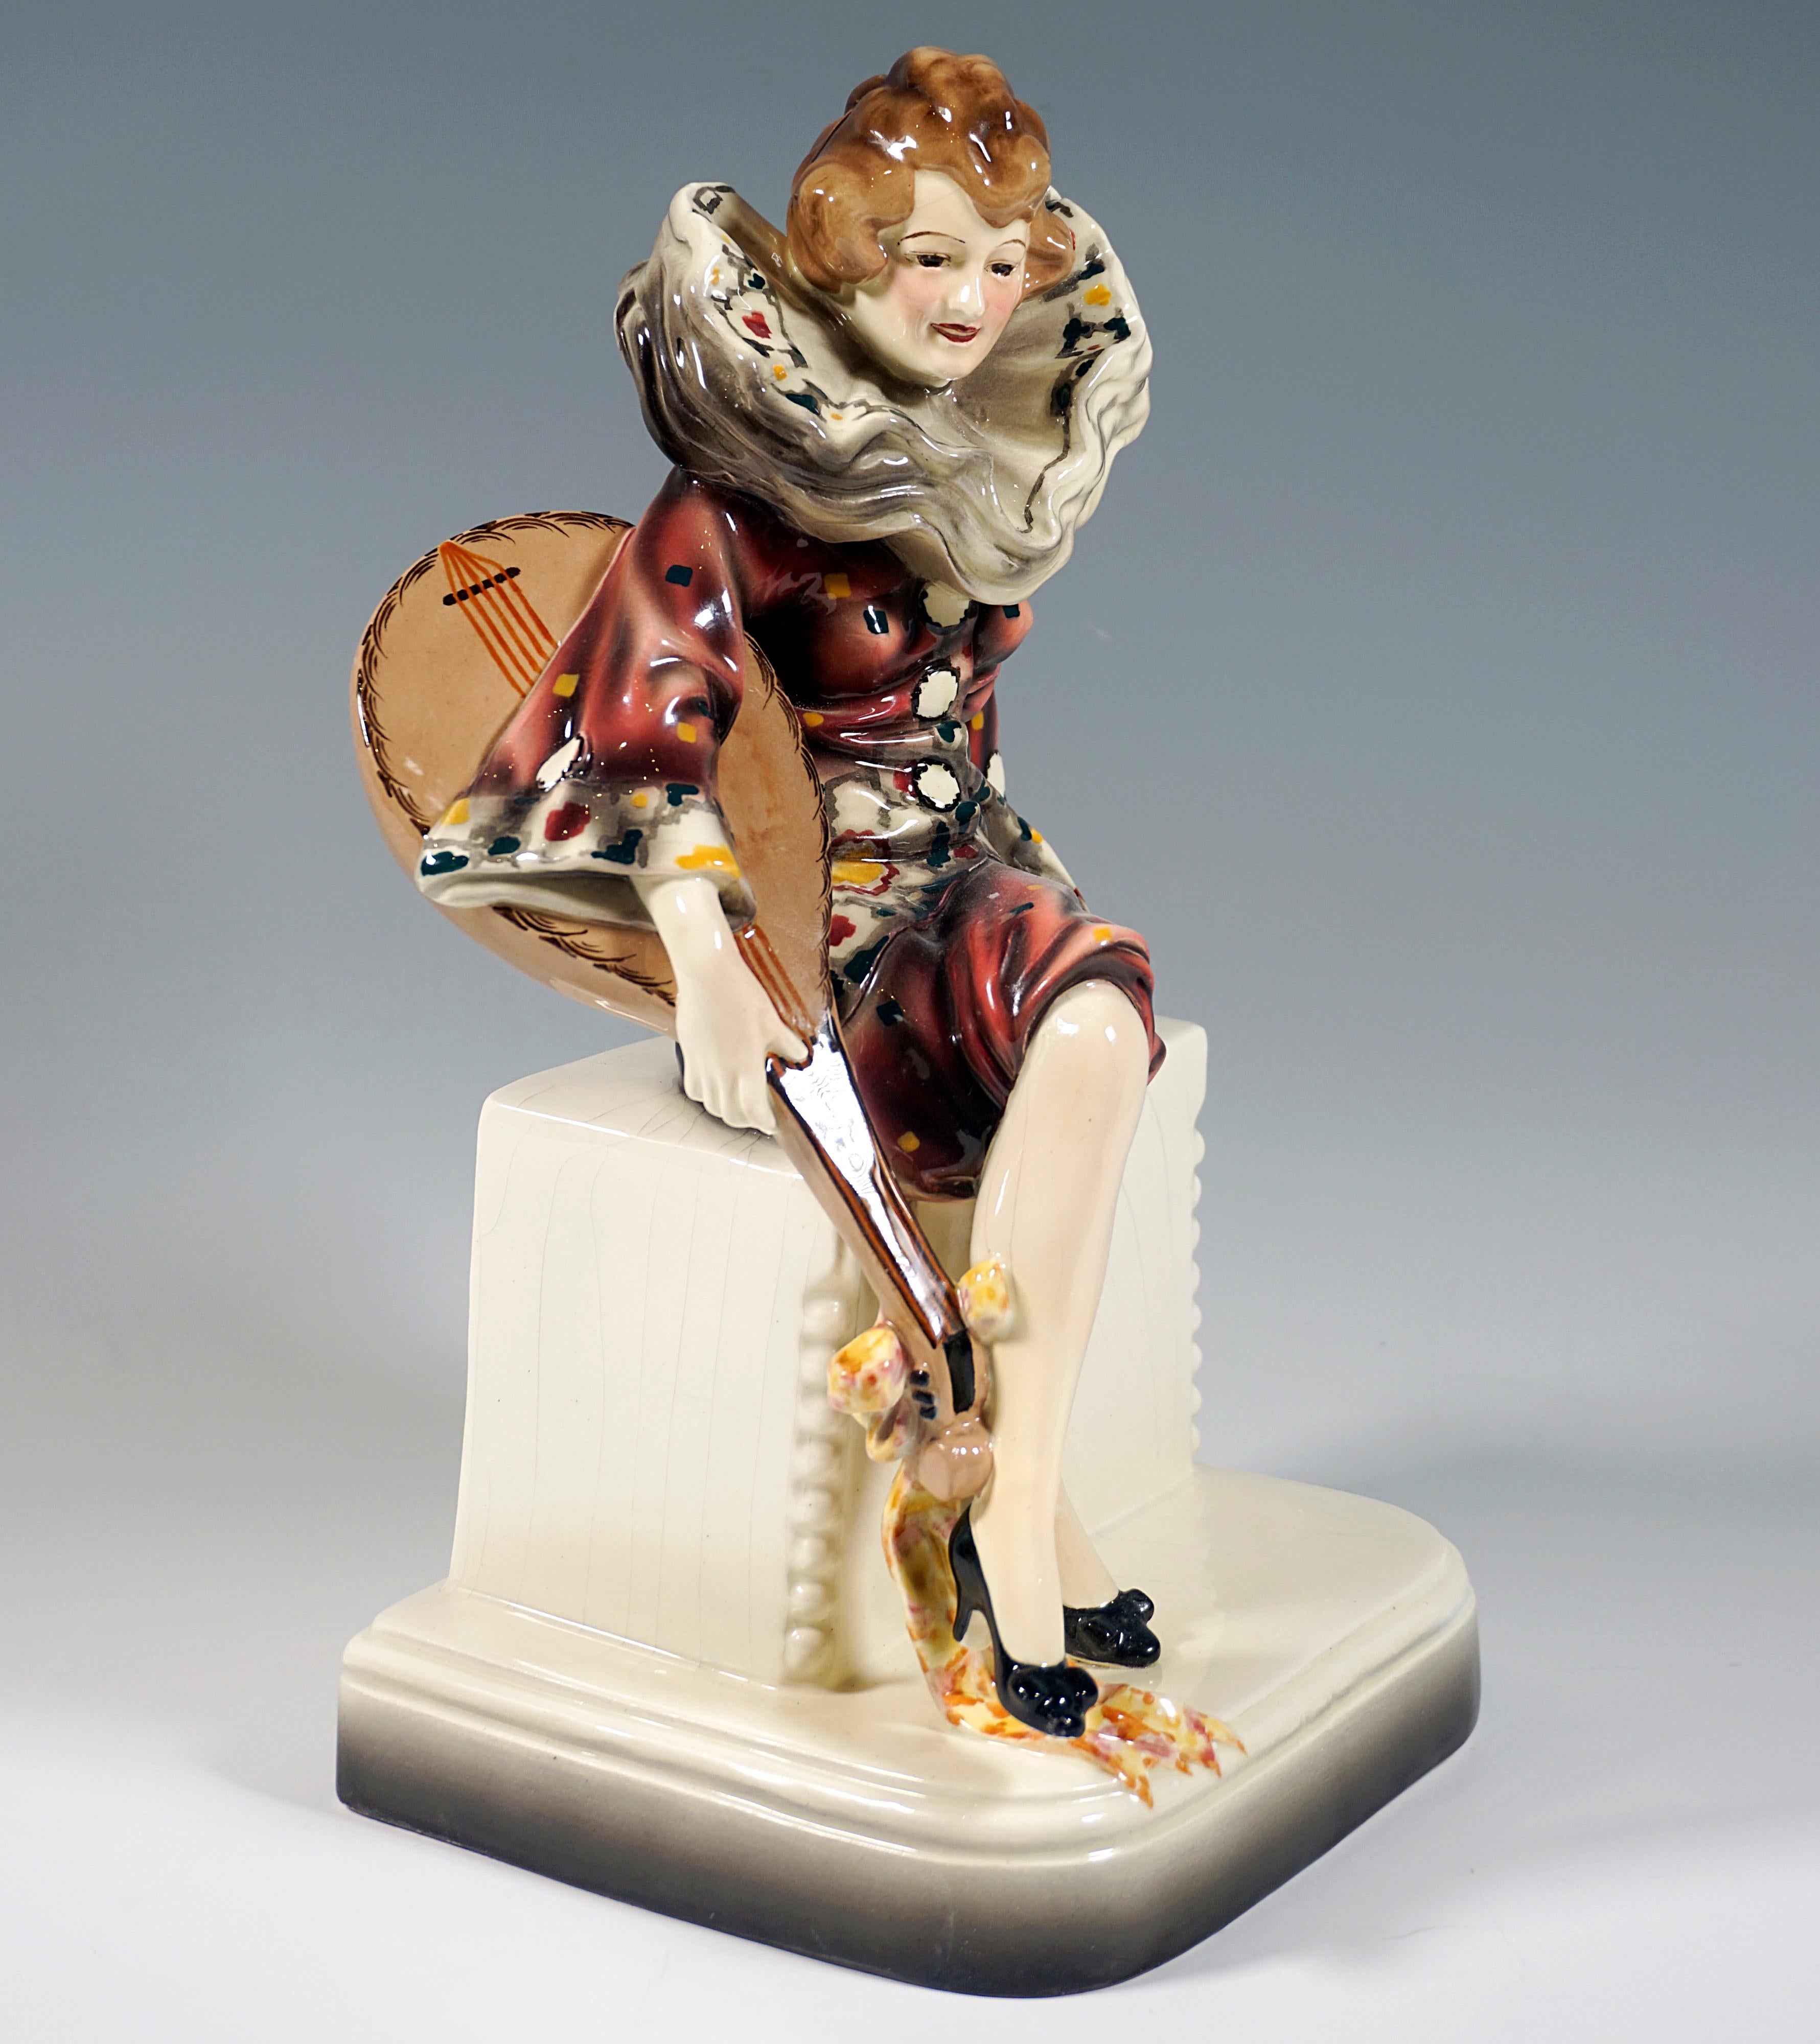 Rare Art Ceramic Figure of the 1920s:
Depiction of a young musician dressed as Pierrette, sitting on a pedestal with her lute, wearing a wide red costume with knee-length harem pants and particularly large beige ruff, the garments decorated with